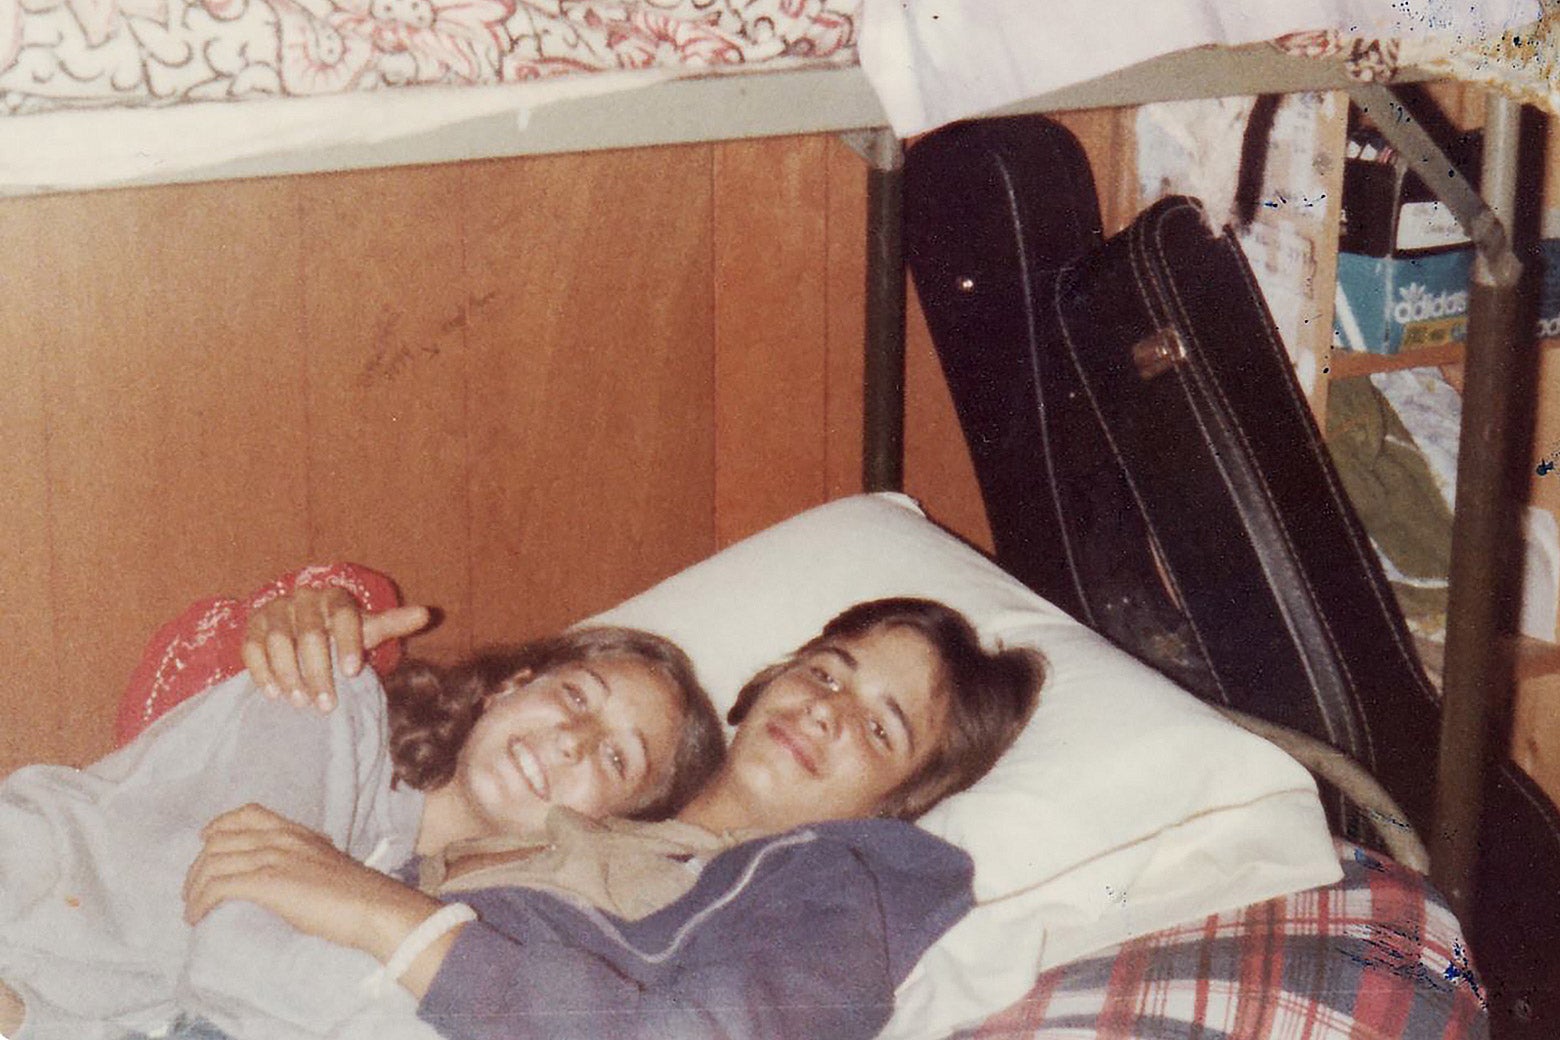 A couple lays together on the bottom bunk of a bunk bed.